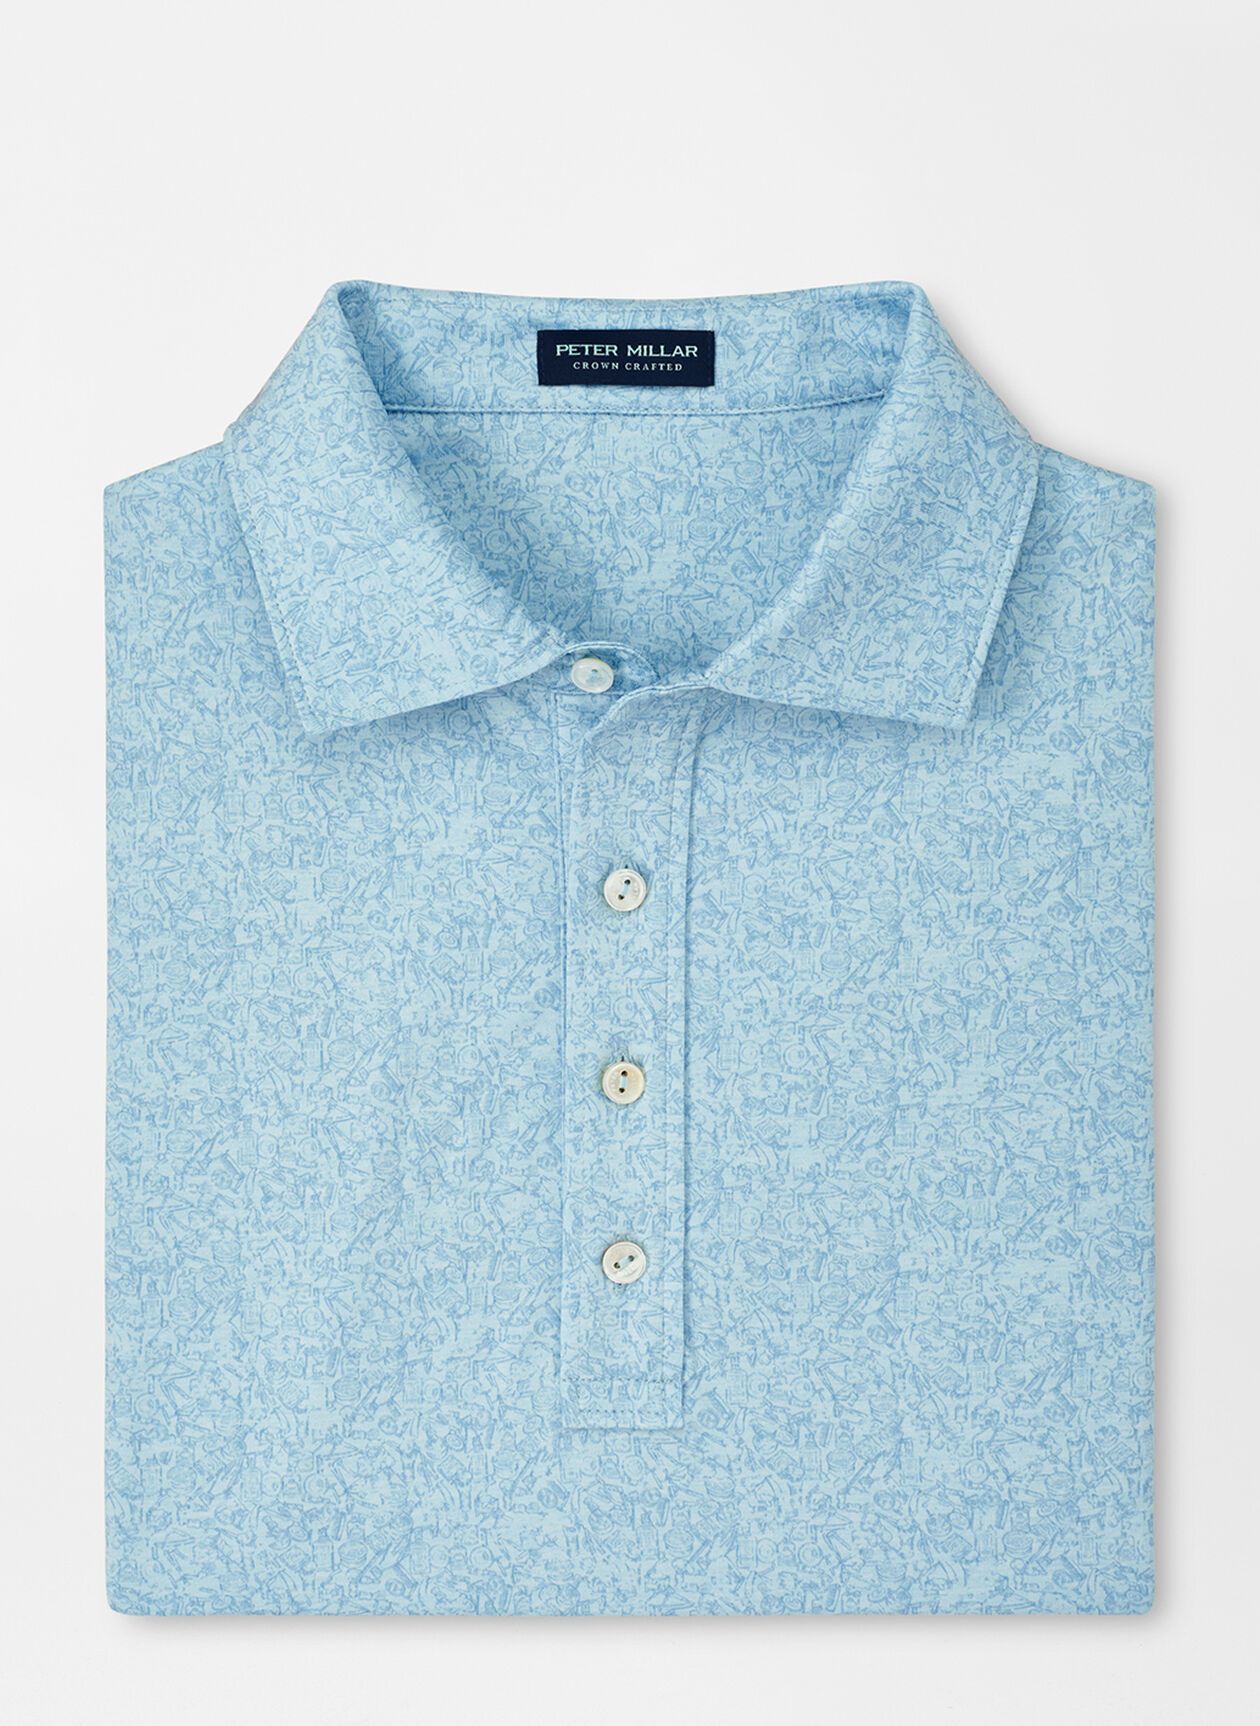 Clean Shaven Performance Jersey Polo | Peter Millar